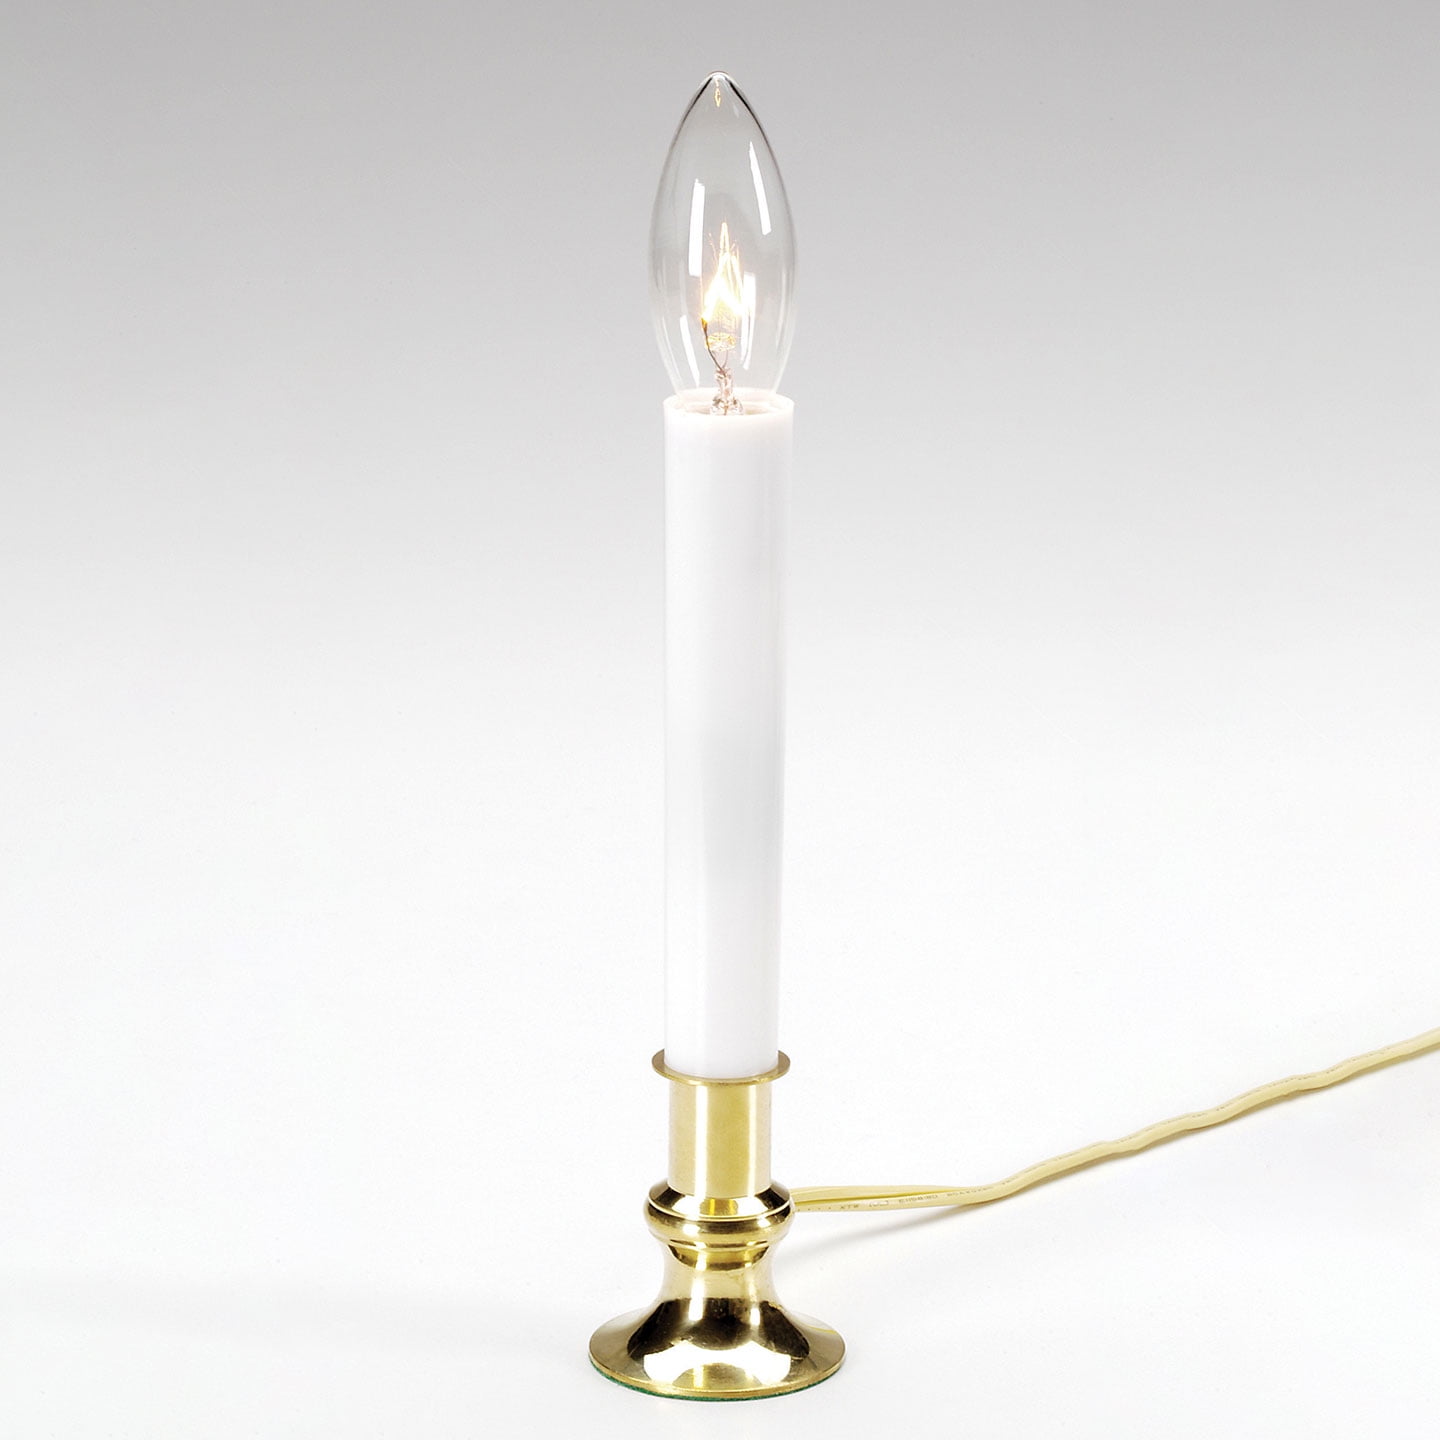 Darice 9/” Electric Window Candle Lamp with Light Sensor Light Sensor Automatically Turns Candle on at Dusk and Off at Dawn Brass-Plated Base Plug-in Lamp Includes 7W Glass Bulb